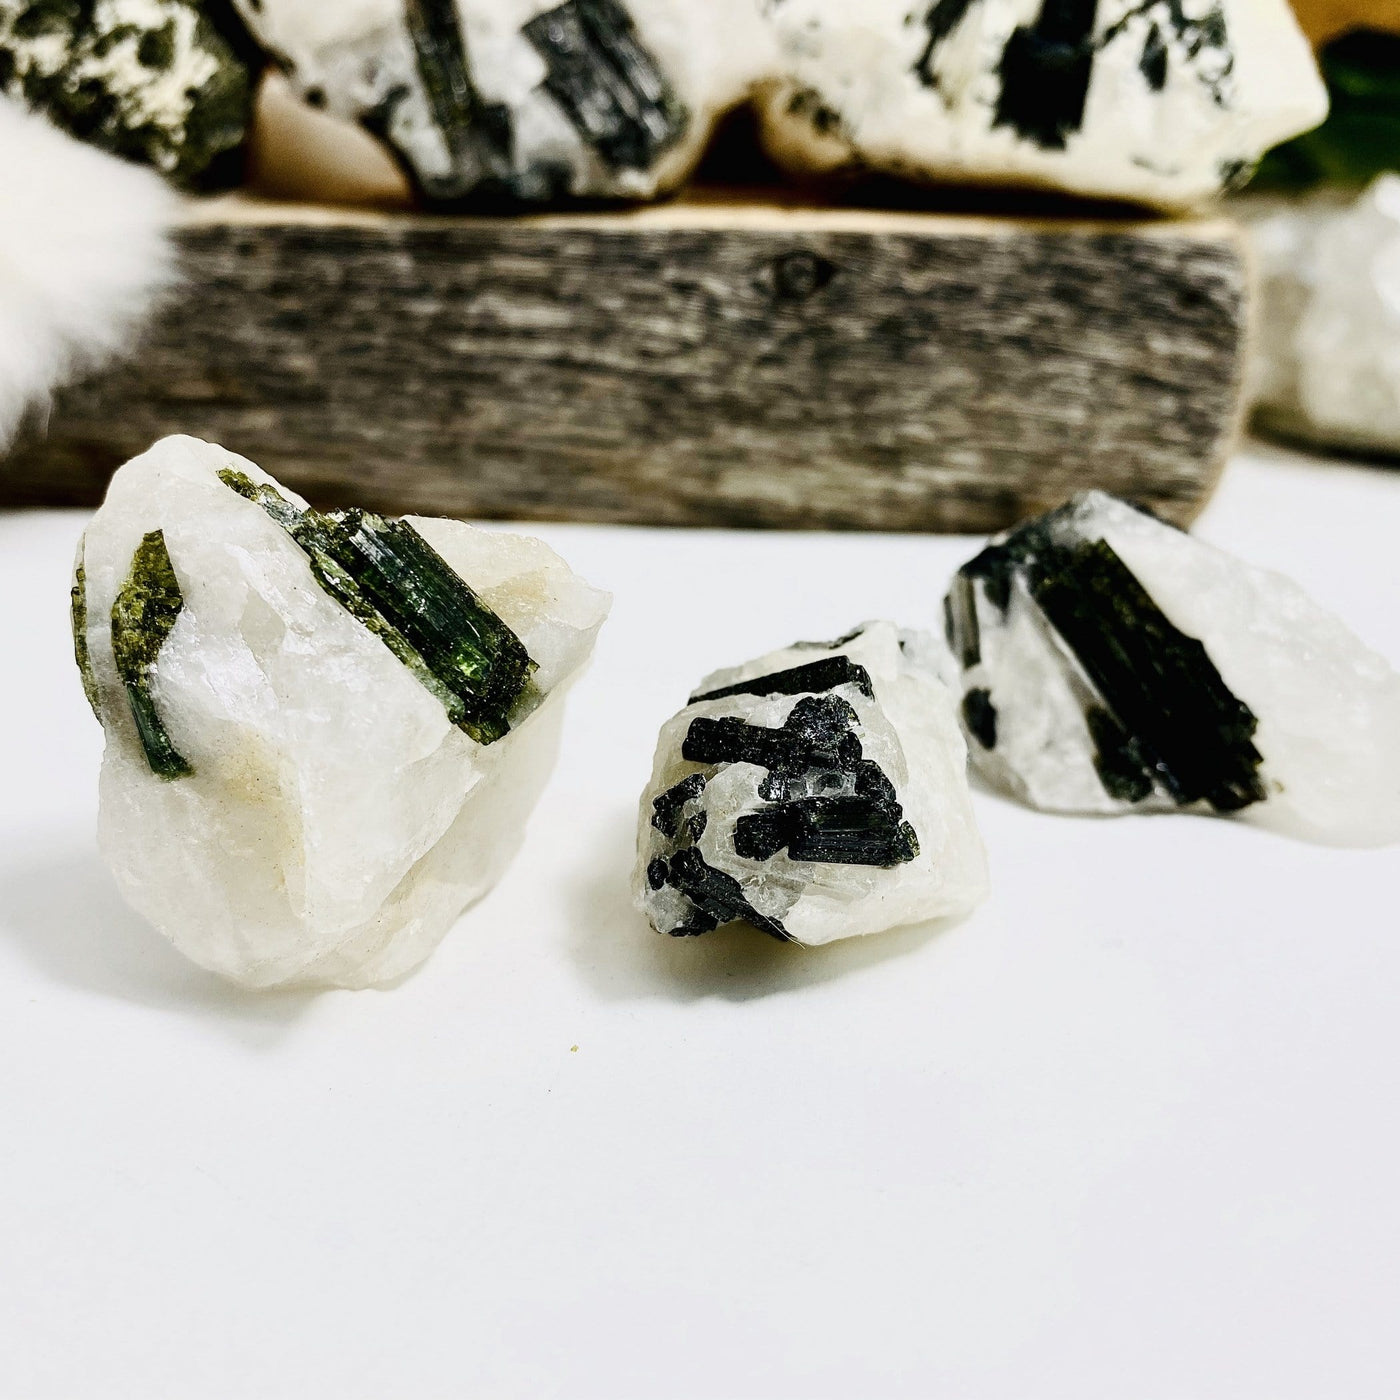 3 different size of Epidote In Quartz Chunks on white background.